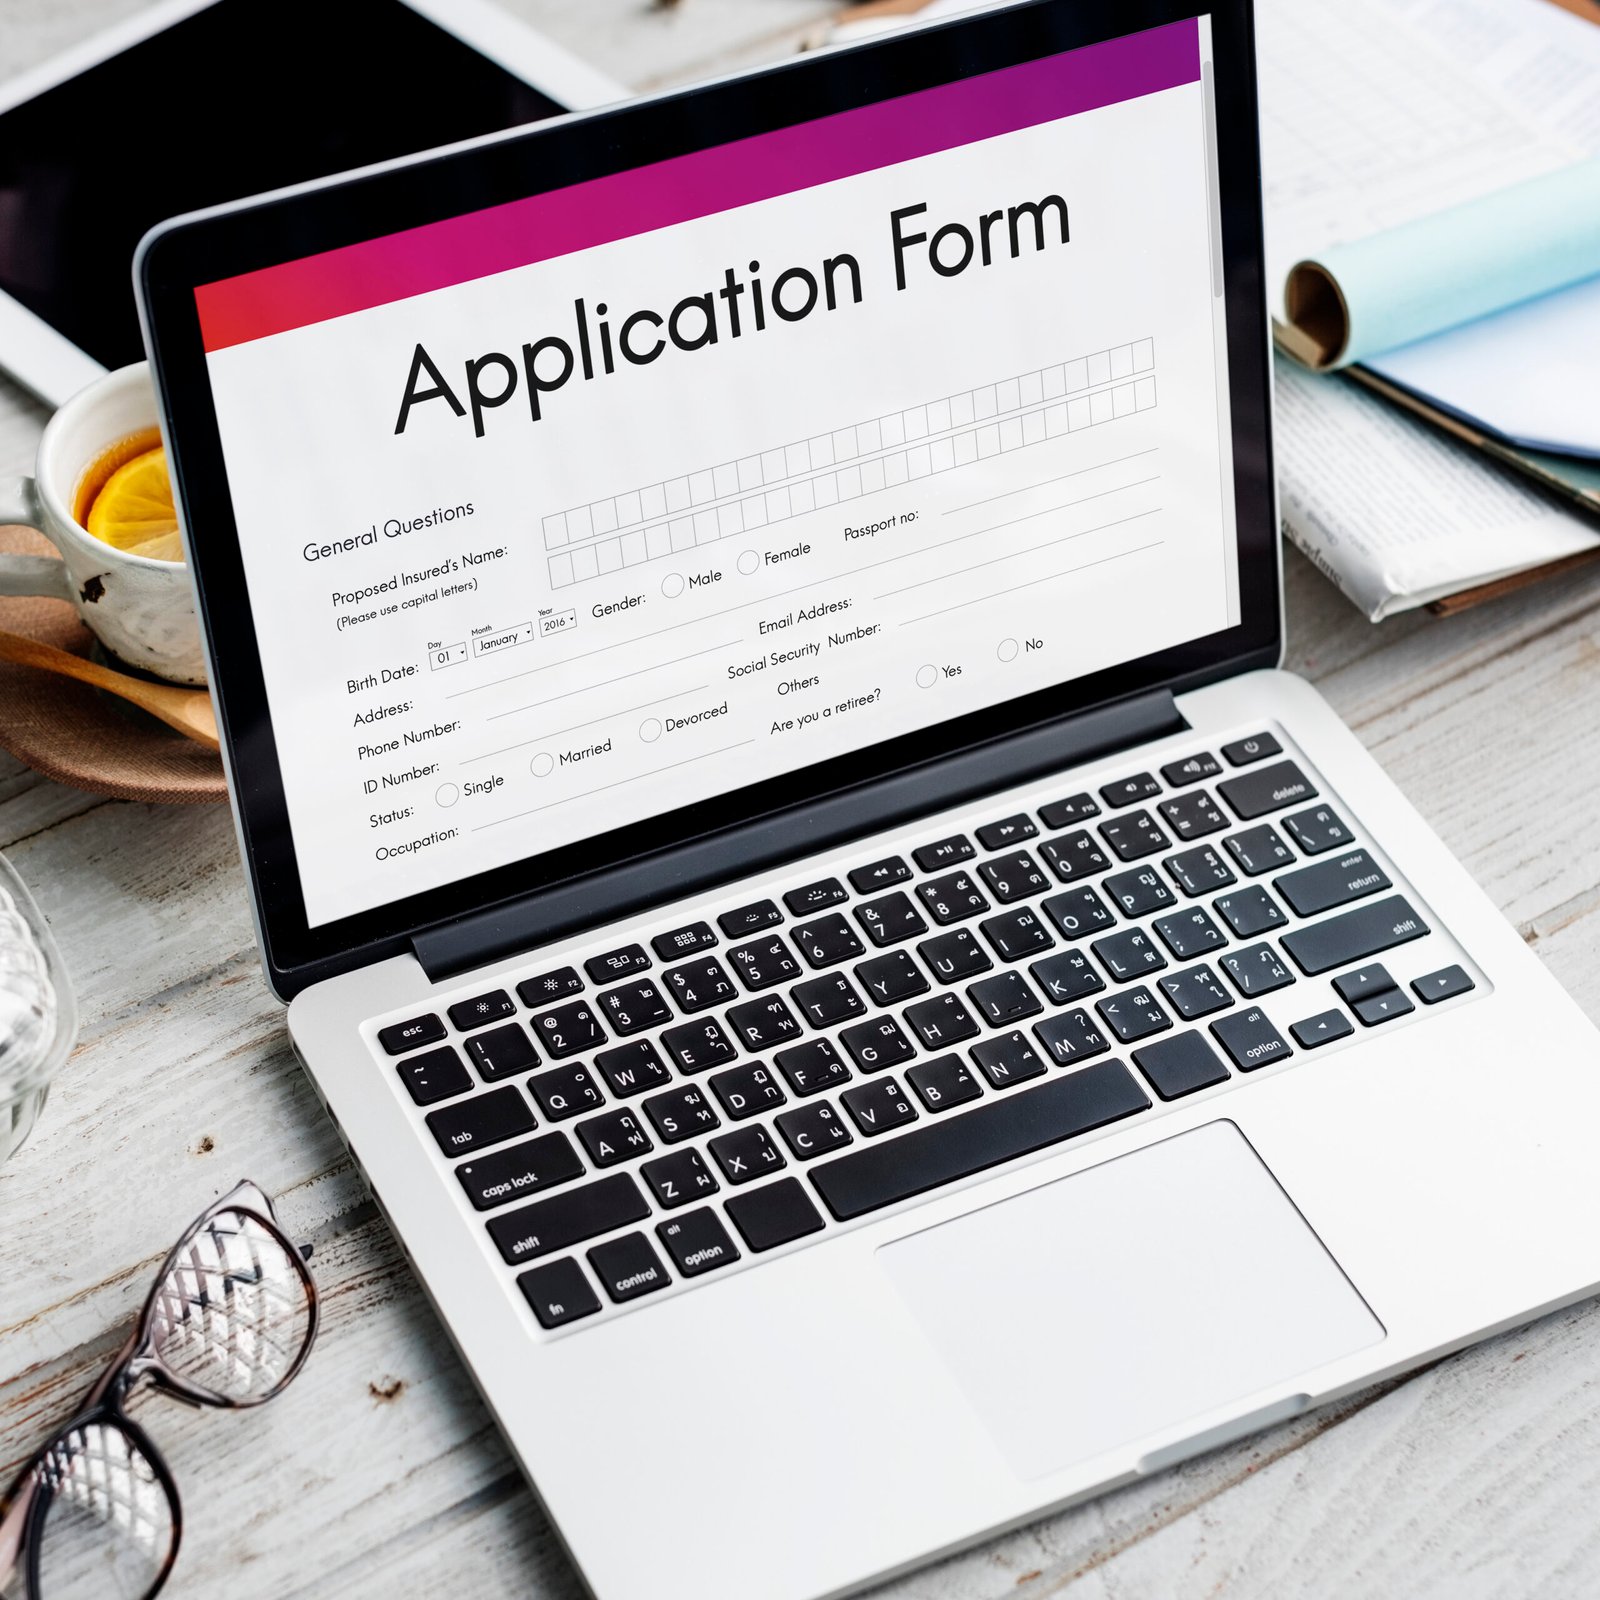 Application Form on Laptop Screen